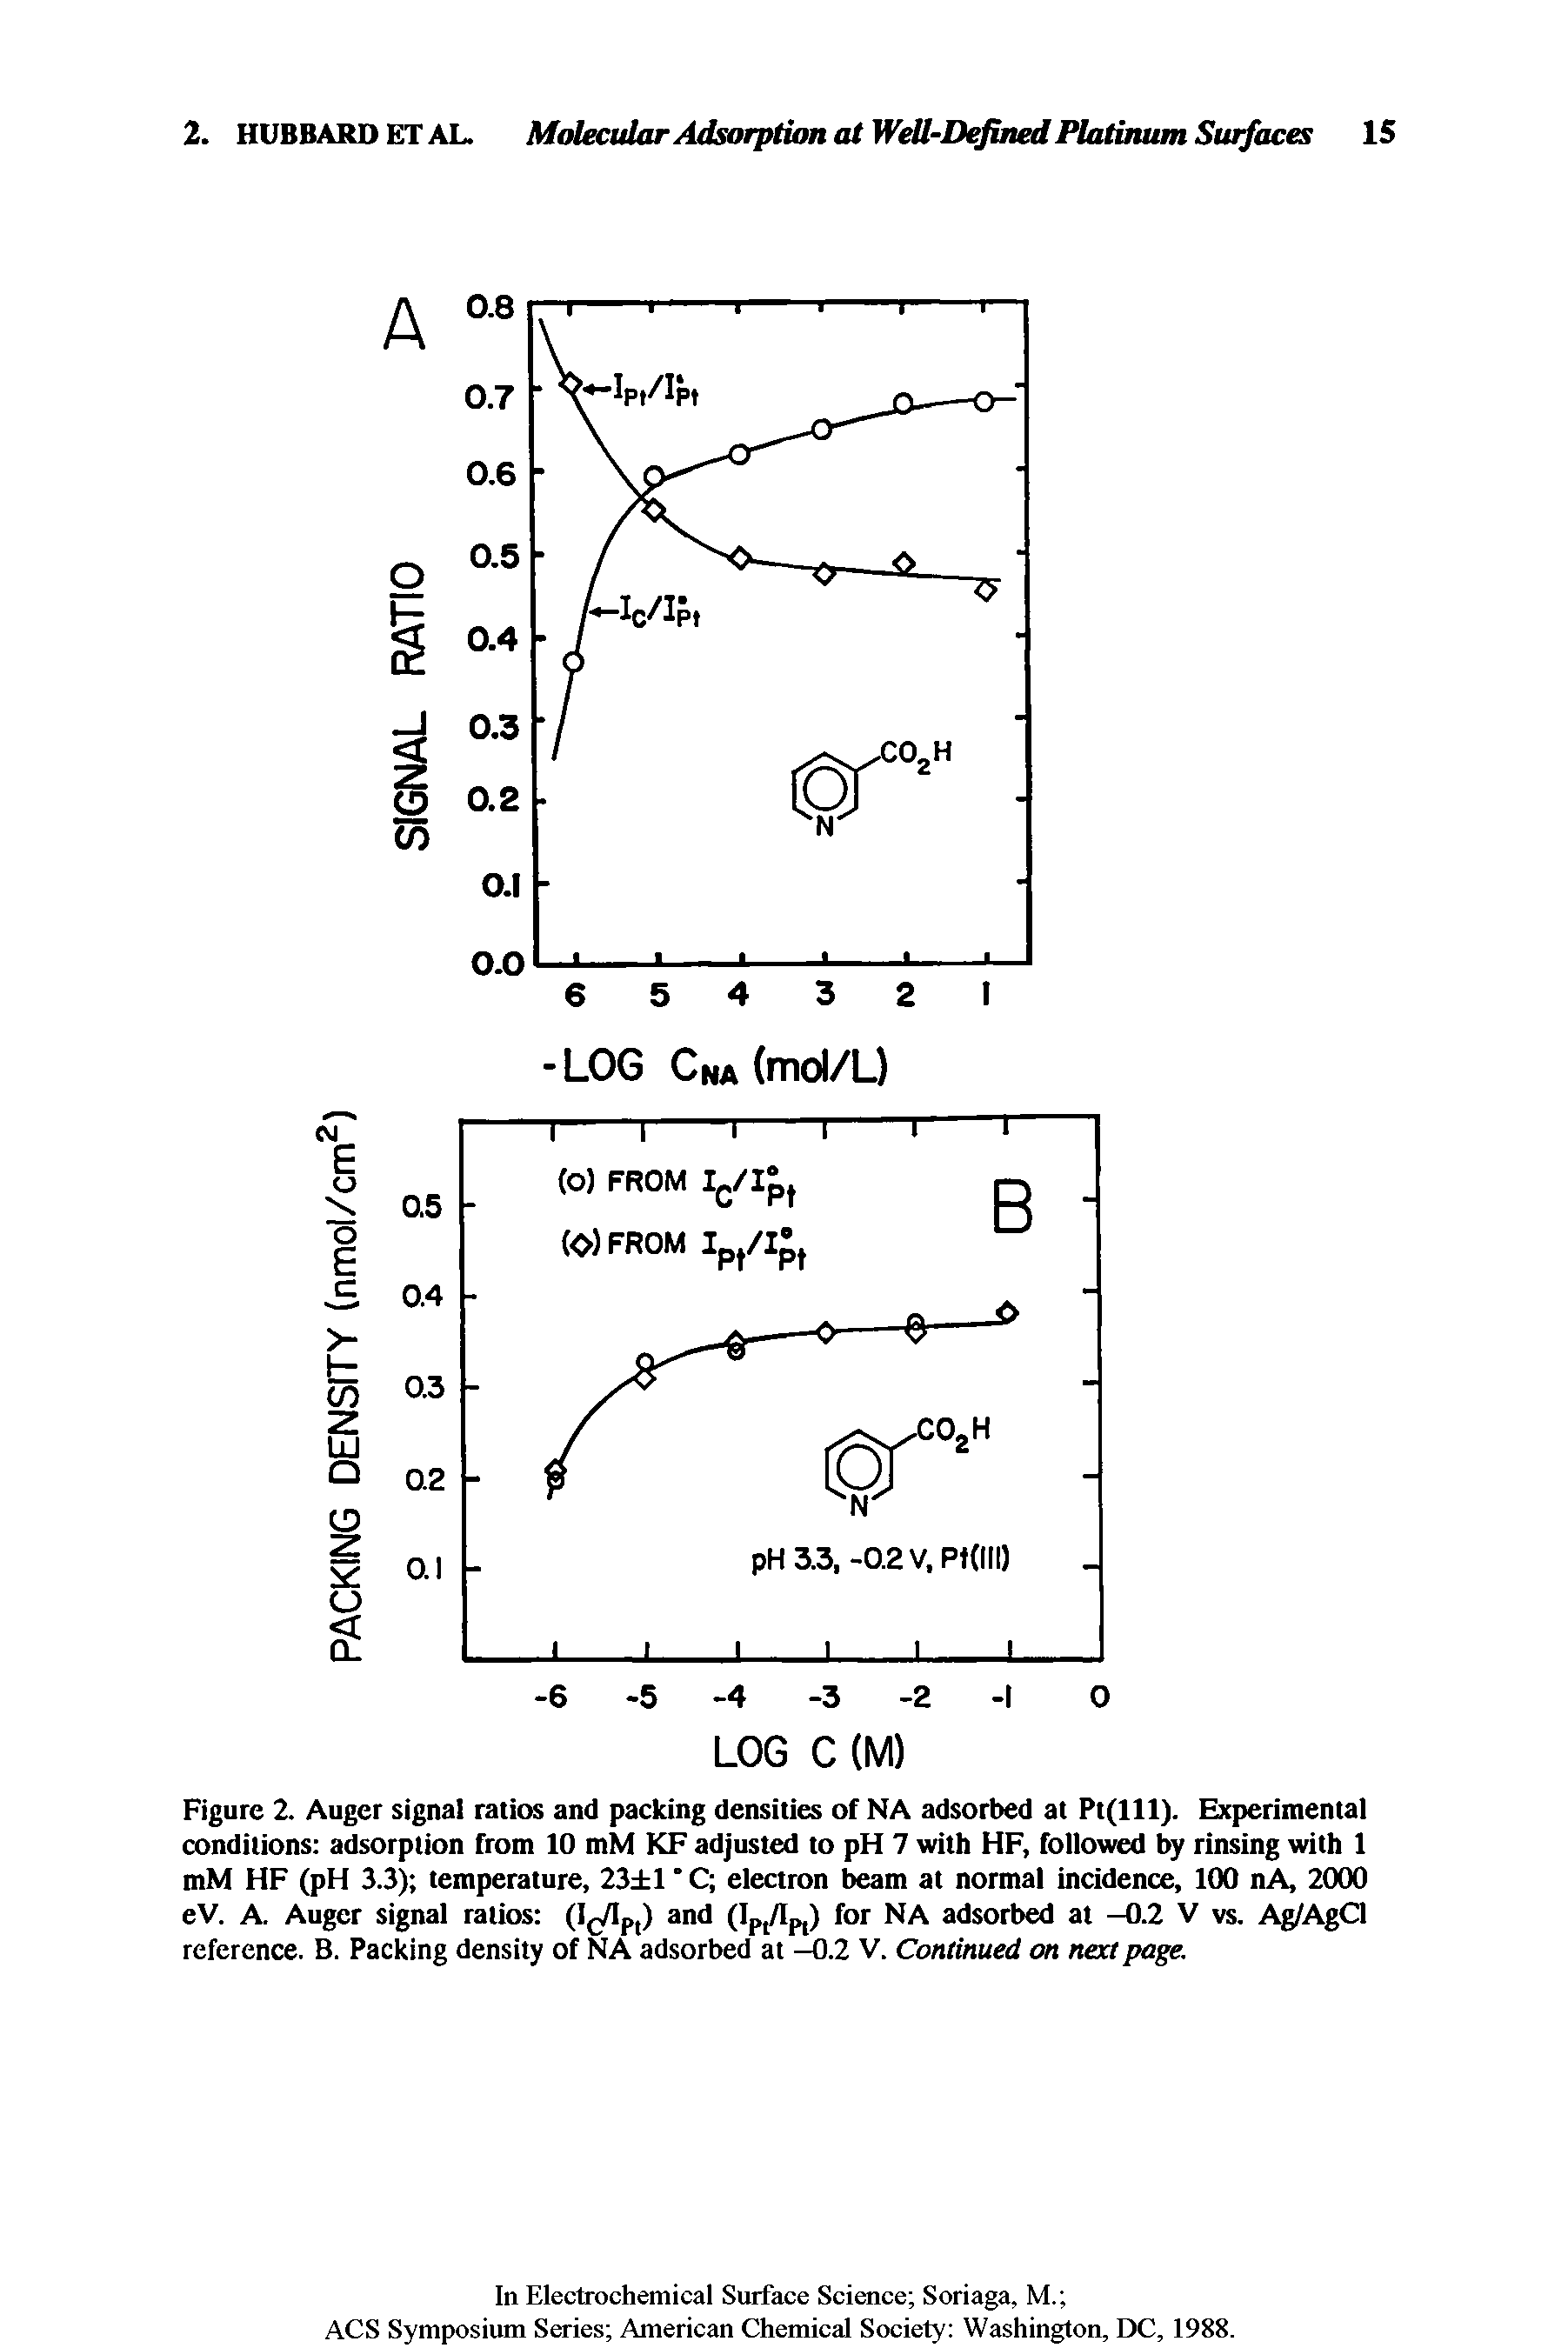 Figure 2. Auger signal ratios and packing densities of NA adsorbed at Pt(lll). Experimental conditions adsorption from 10 mM KF adjusted to pH 7 with HF, followed by rinsing with 1 mM HF (pH 3.3) temperature, 23 1 C electron beam at normal incidence, 100 nA, 2000 eV. A. Auger signal ratios 0(/Ipt) and (Ipt/Ip,) for NA adsorbed at -0.2 V vs. Ag/AgCl reference. B. Packing density of NA adsorbed at —0.2 V. Continued on next page.